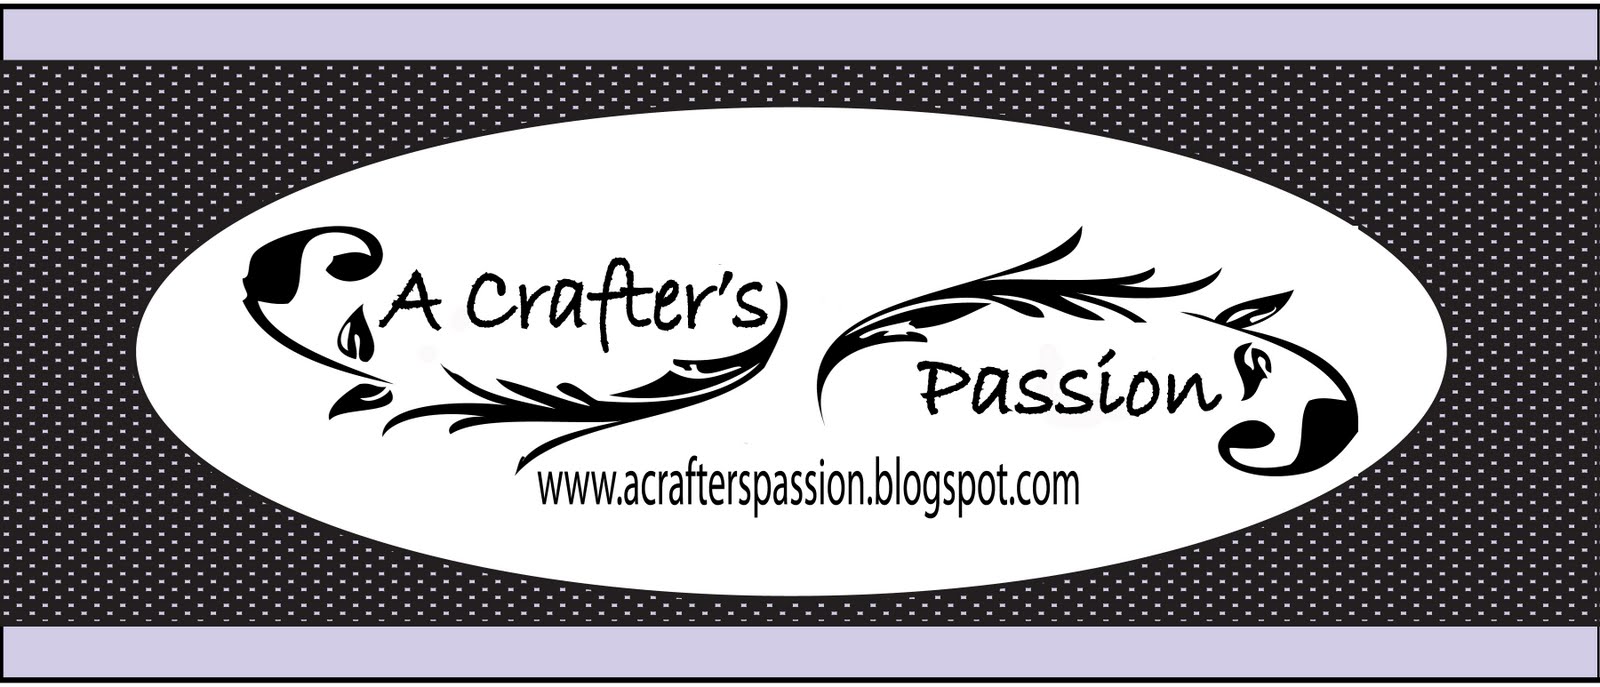 A Crafter's Passion